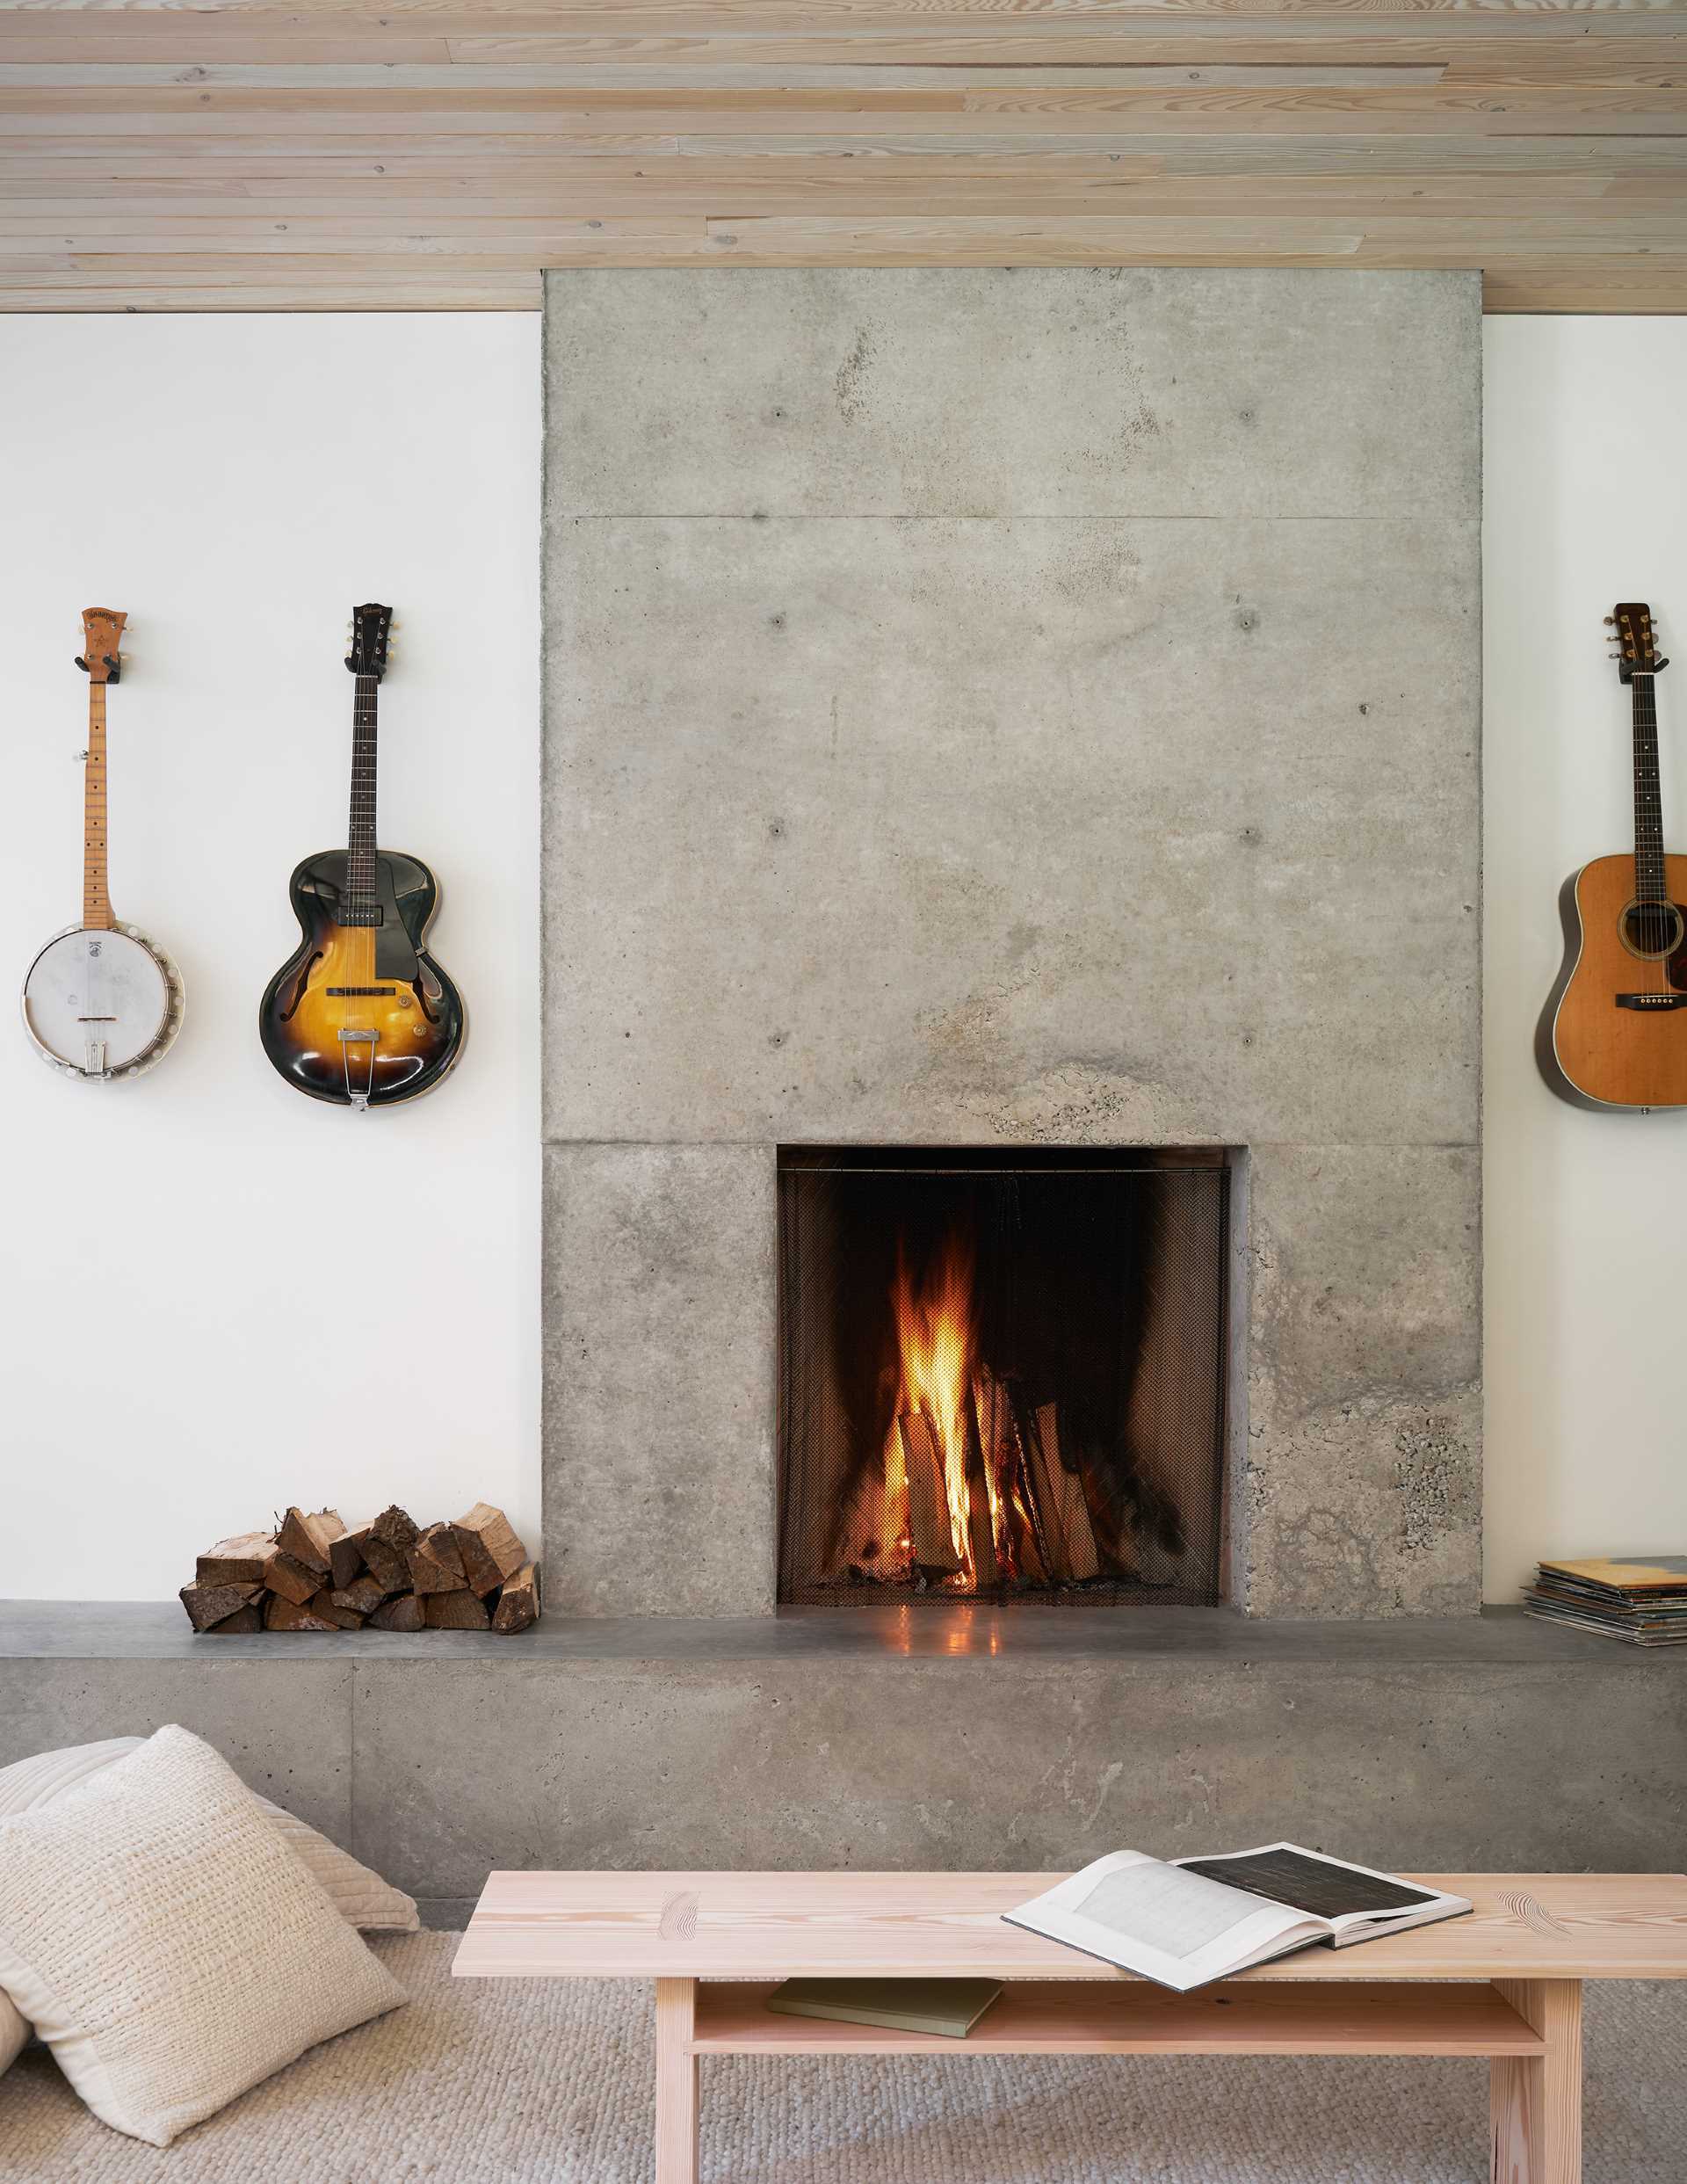 In this modern living room, the concrete hearth of the fireplace lines the wall and transitions into a bench with a skylight above.